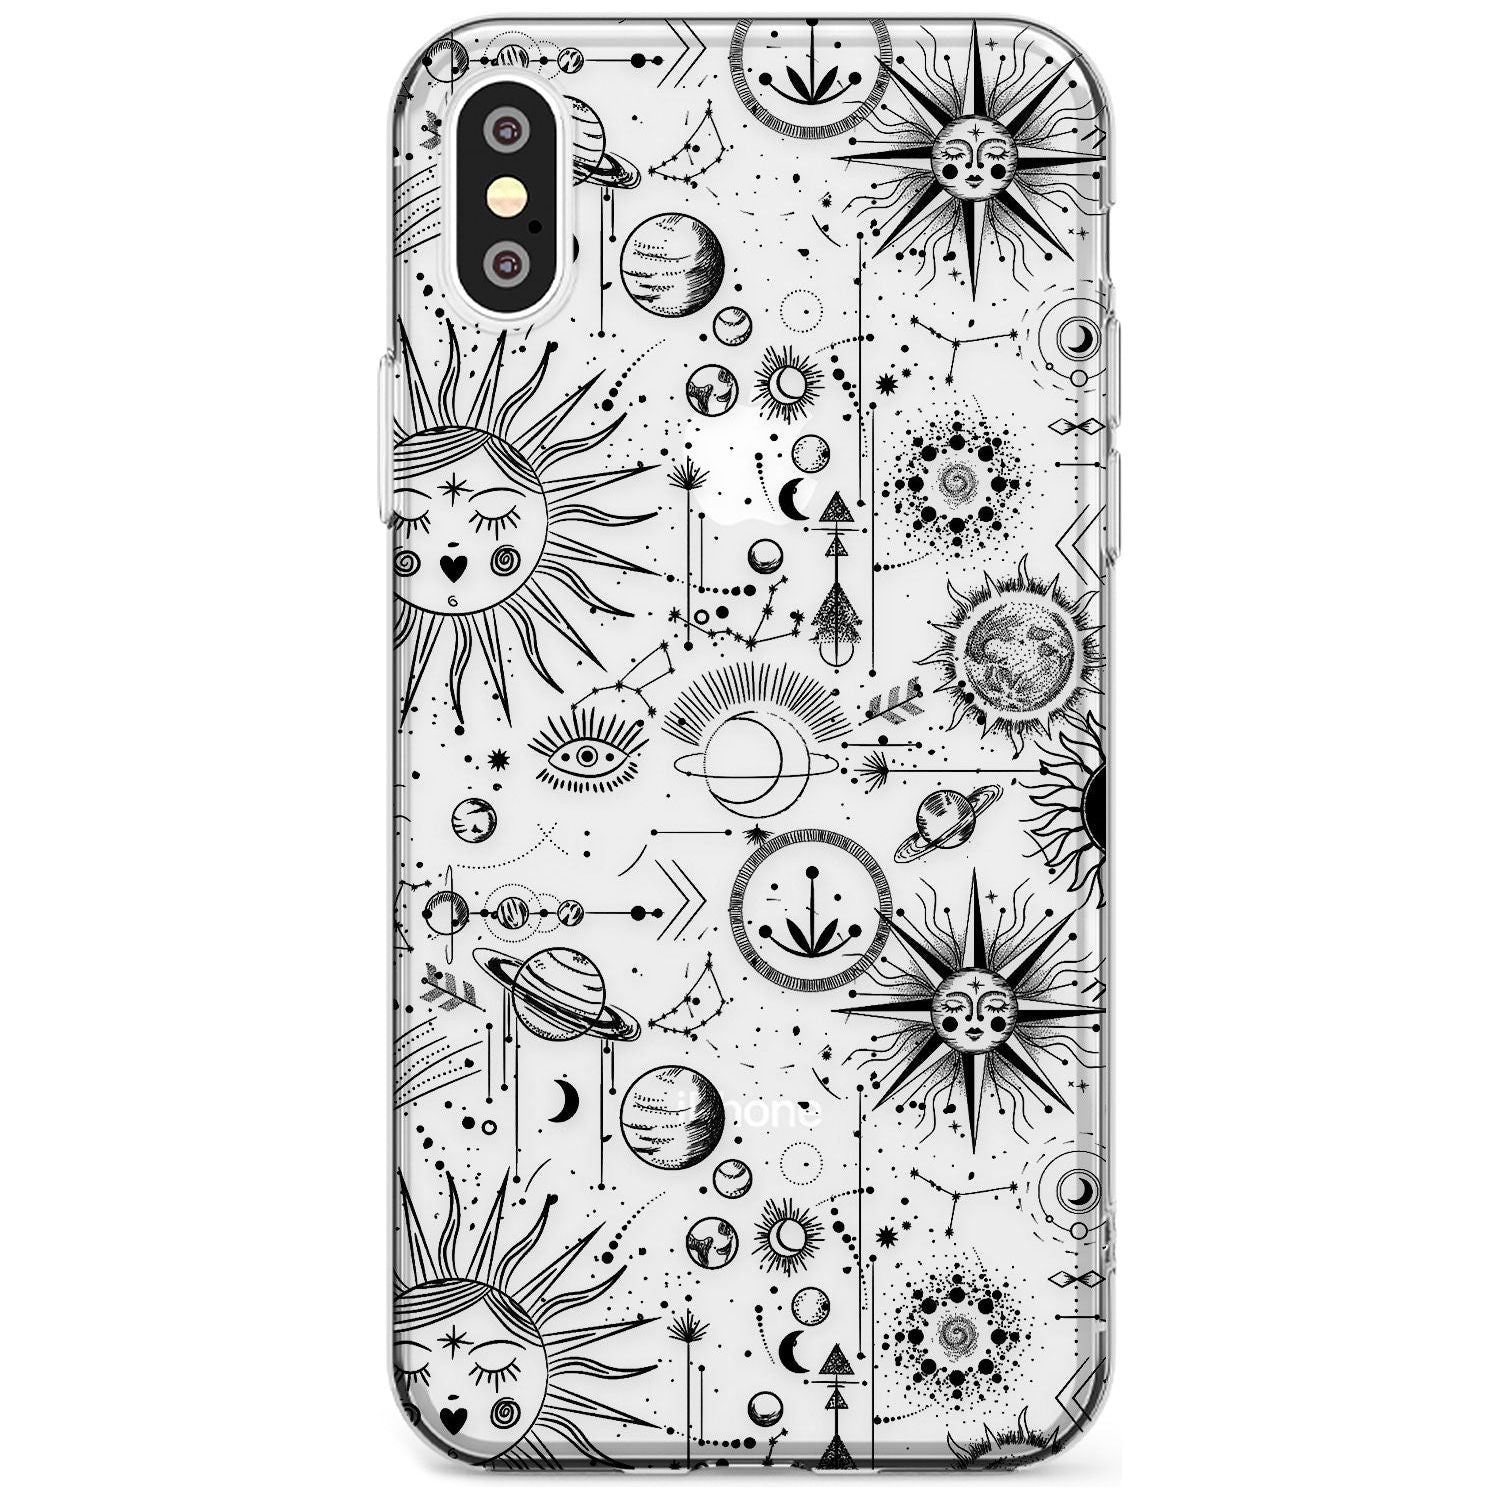 Suns & Planets Vintage Astrological Slim TPU Phone Case Warehouse X XS Max XR